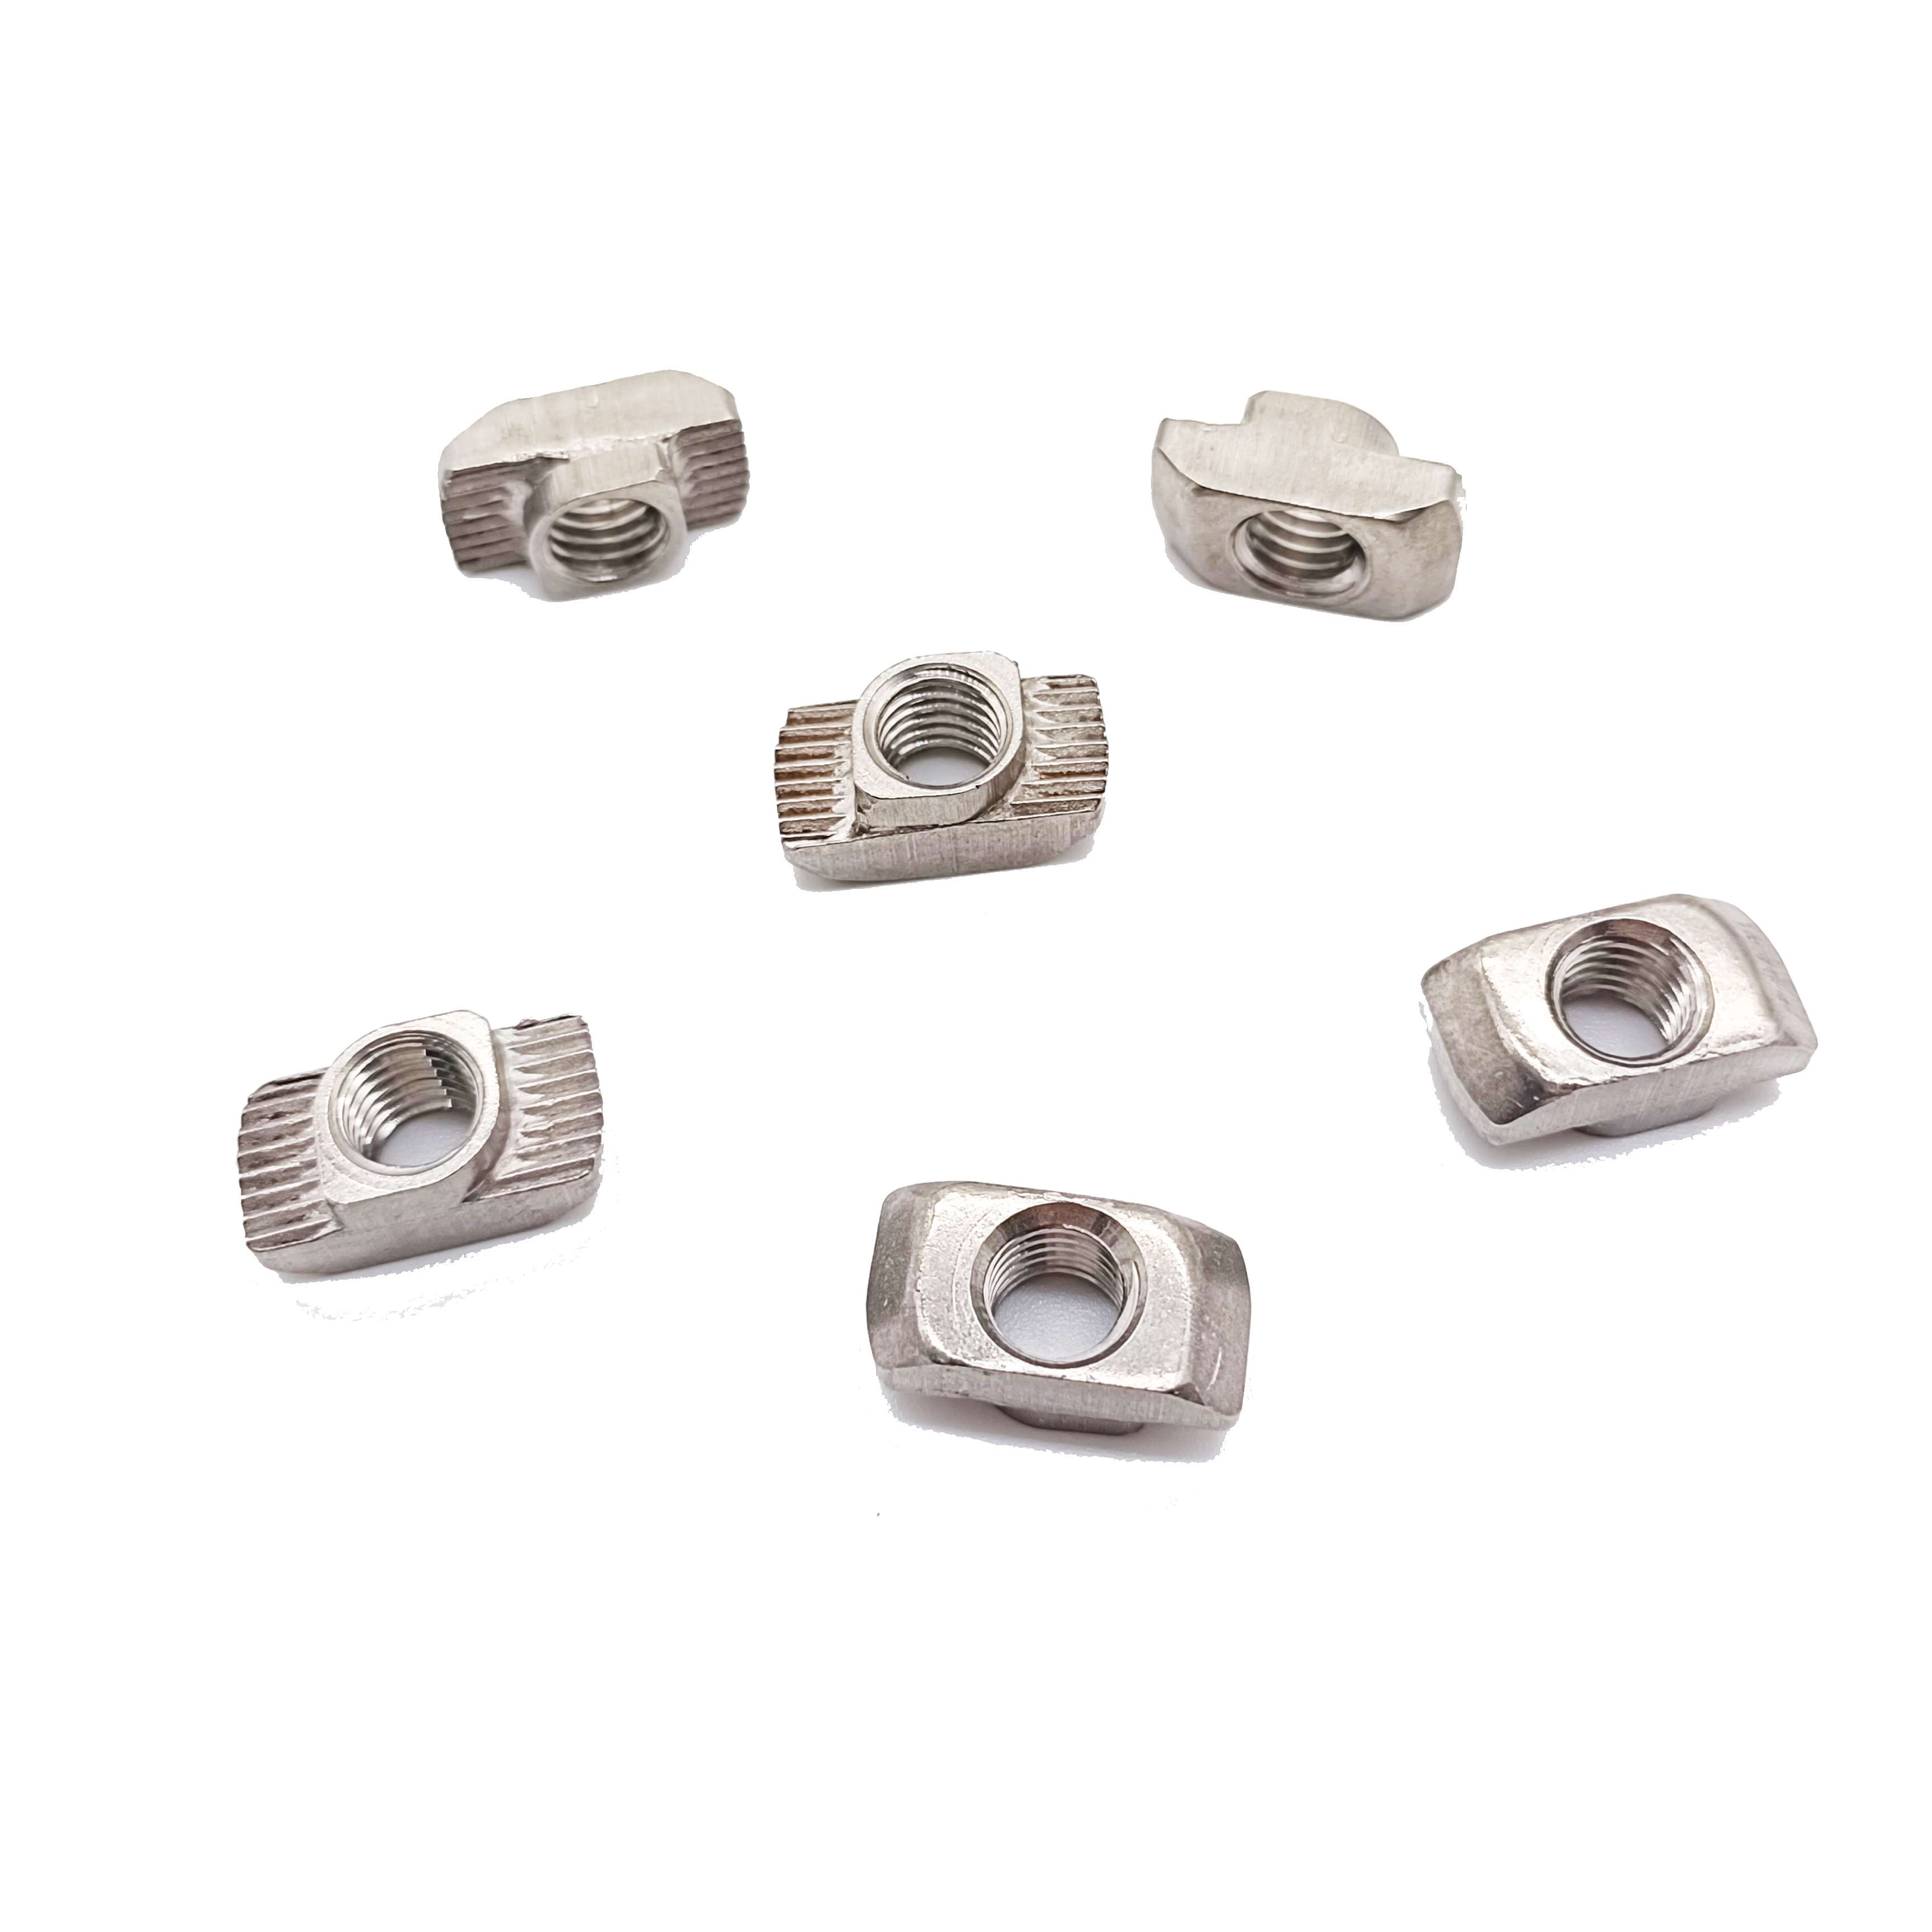 SS304 Stainless Steel M6 M8 T Slot Nuts - Buy t nut, t slot nuts, din 508  Product on hex bolt, u bolt, stainless steel u bolt, threaded rod